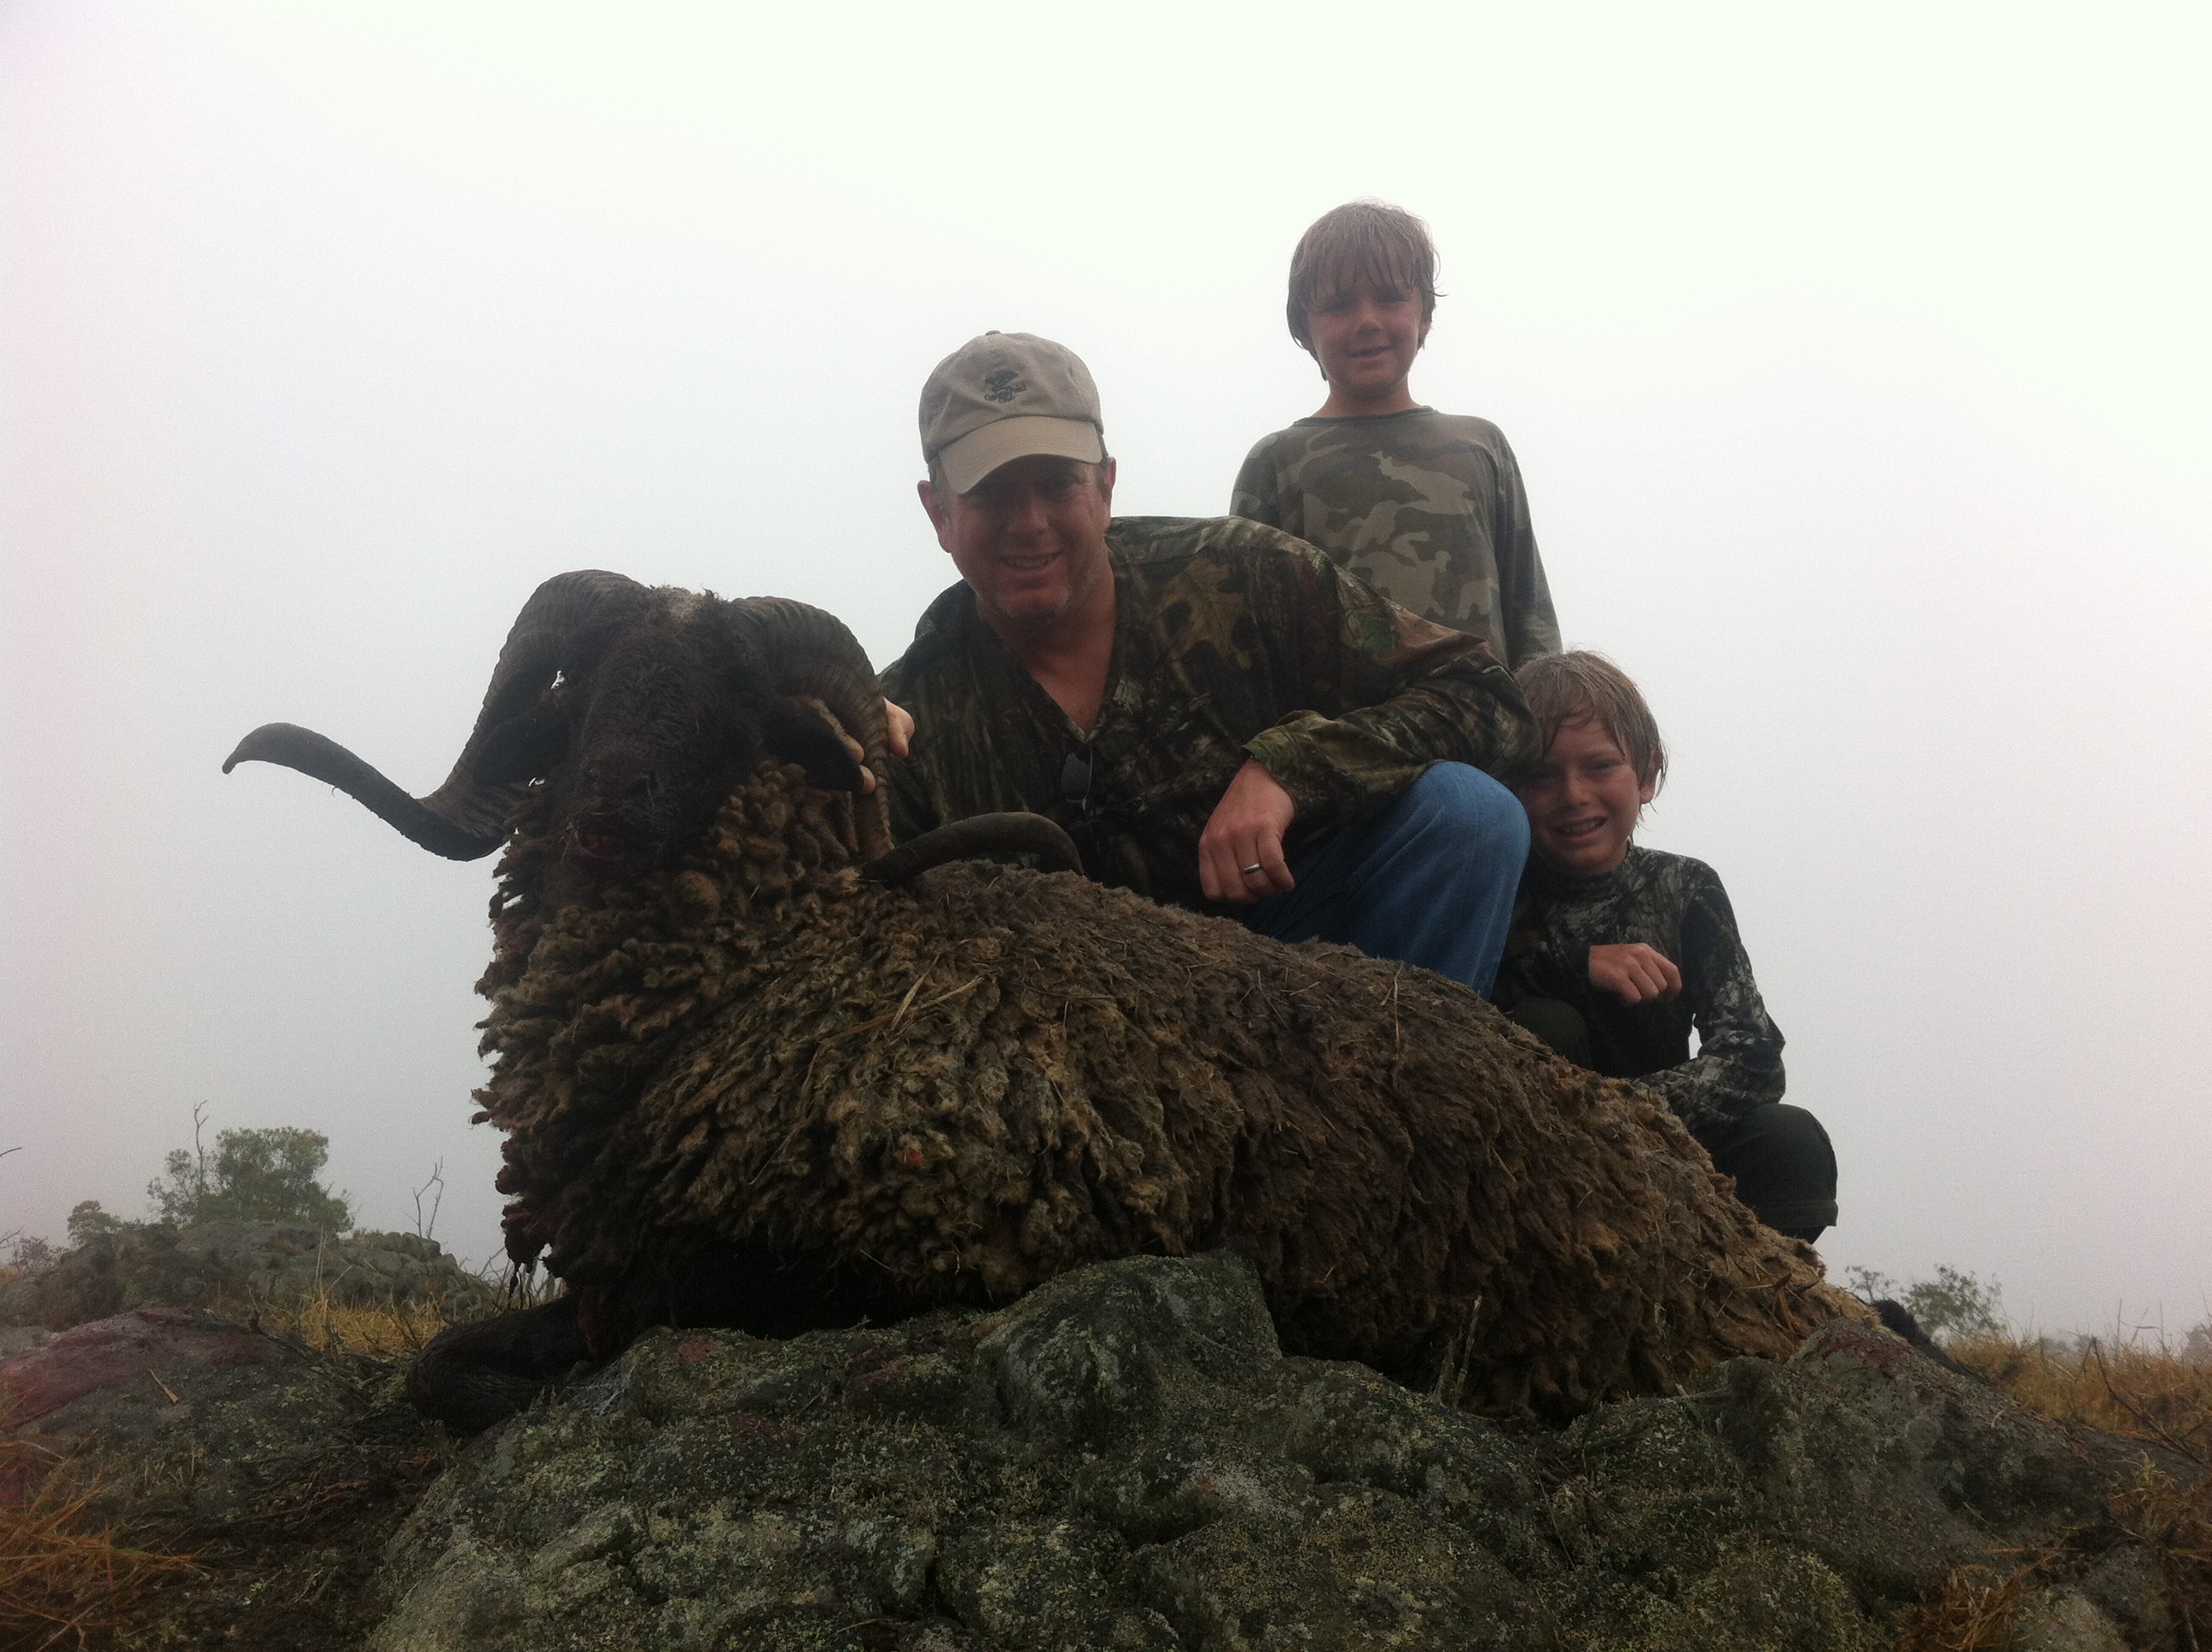 10 Year Old gets a nice Sheep - Fishing Report